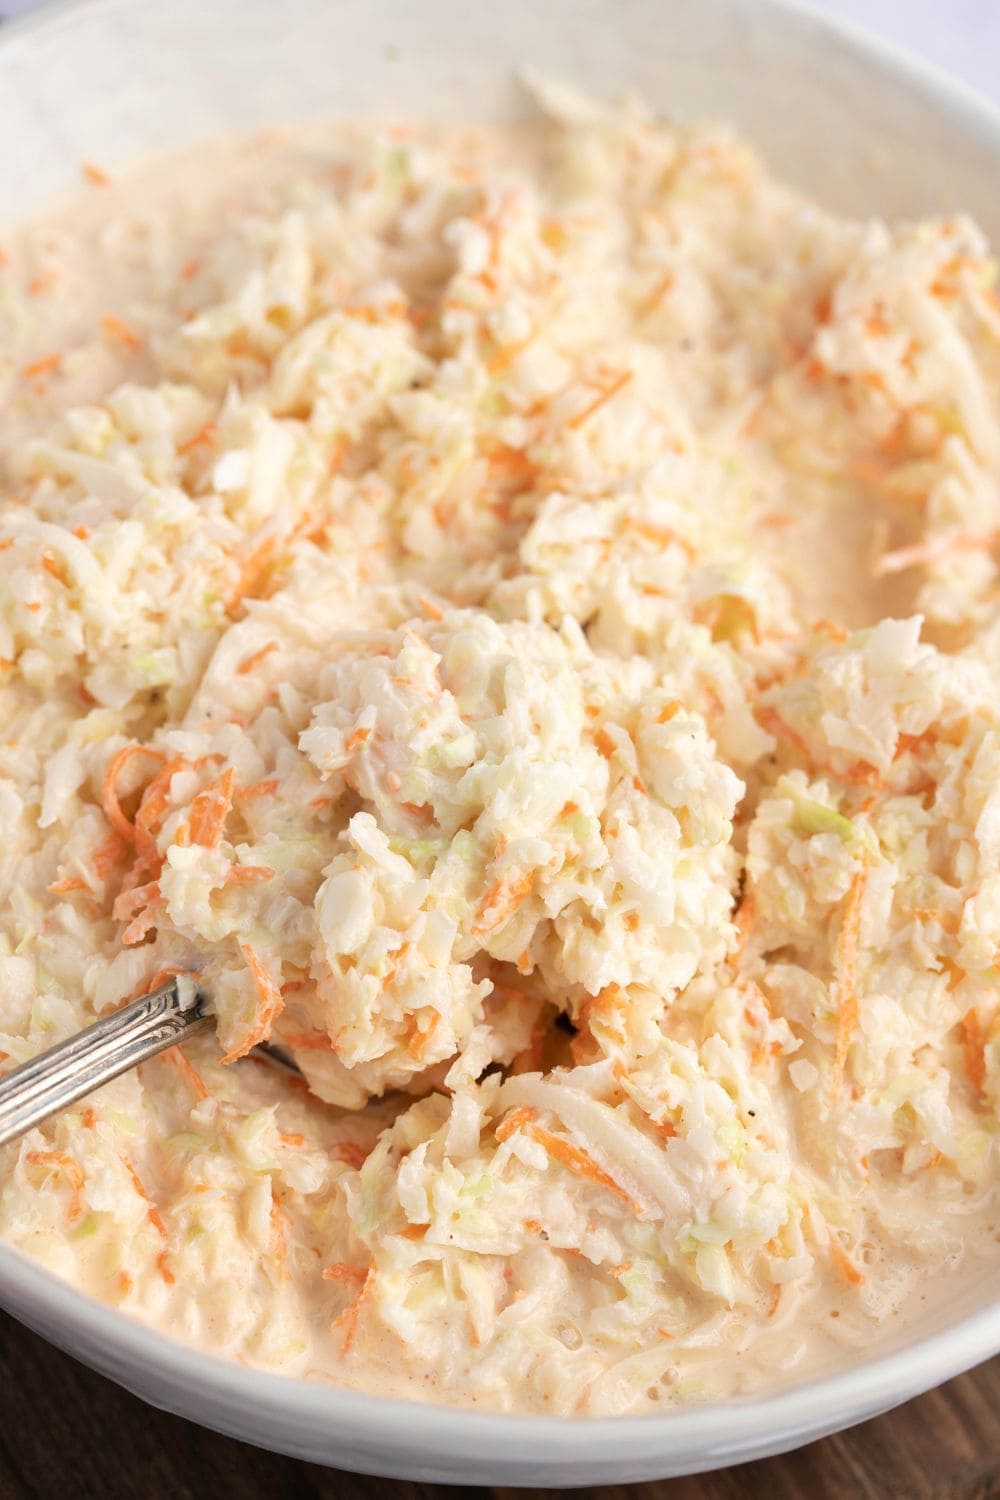 Creamy coleslaw with shredded cabbage and carrots.